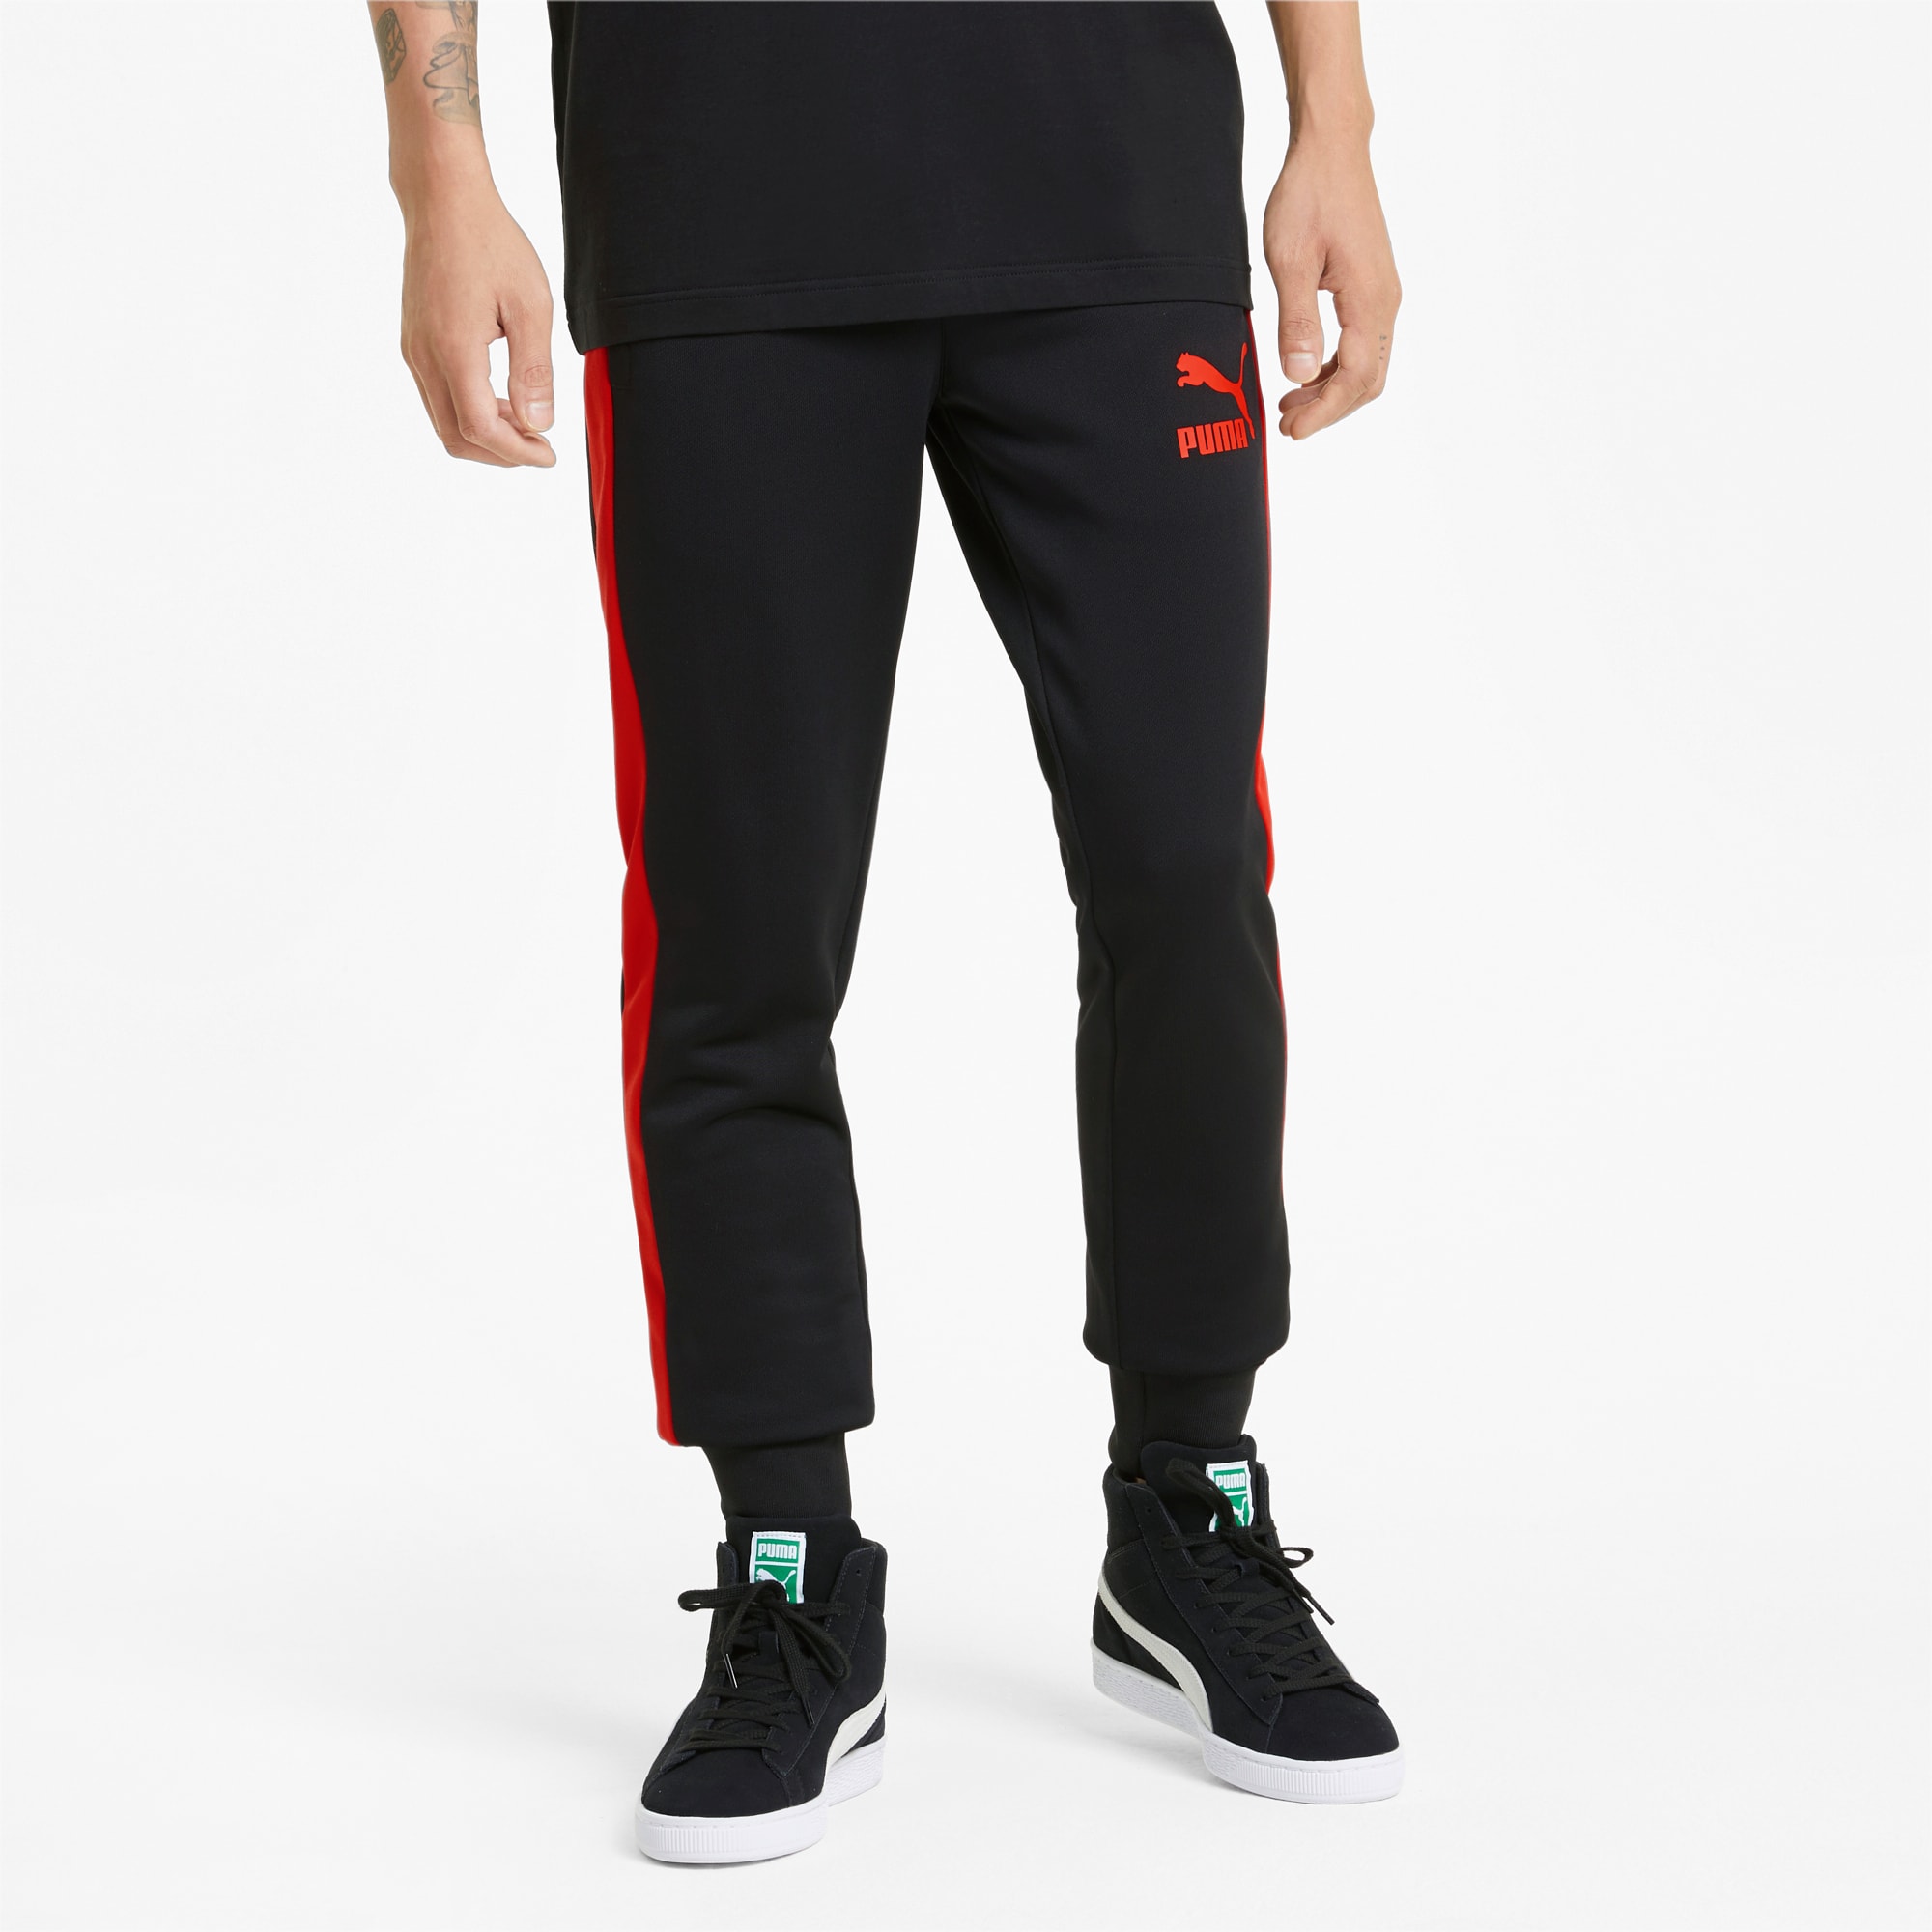 Puma Track Pants. AU Stock (Red & Navy Black available)